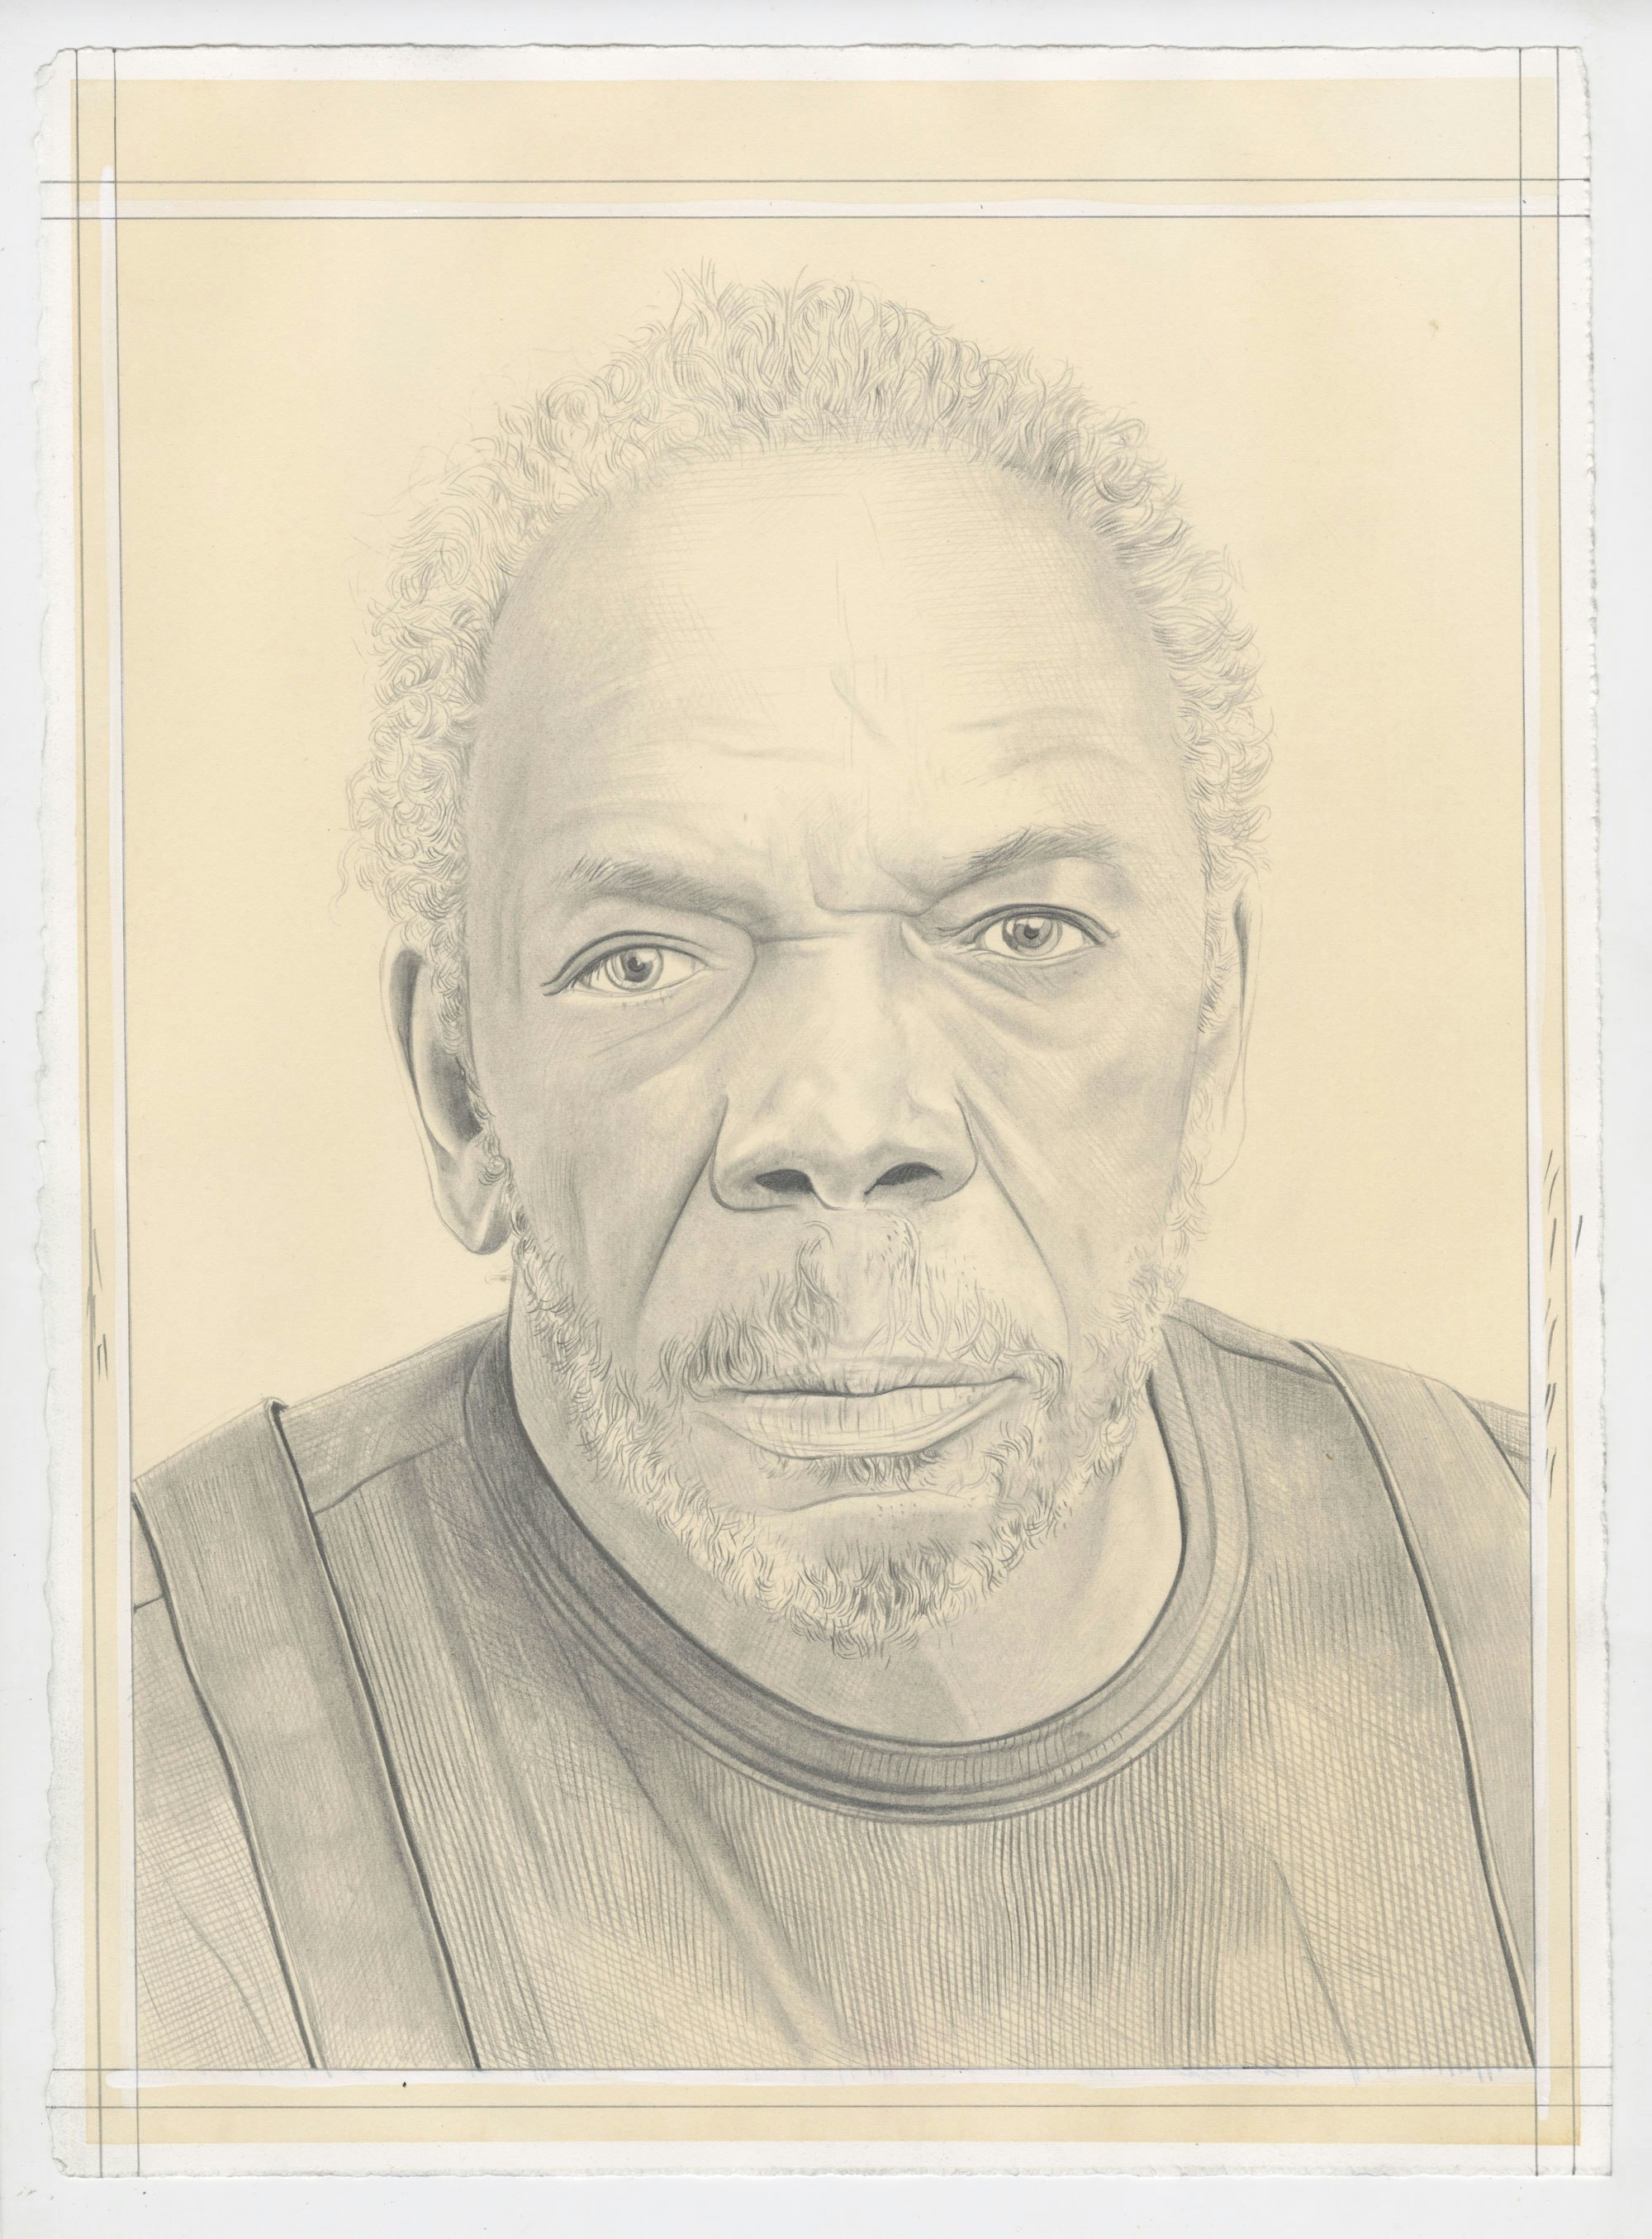 Portrait of Sam Gilliam, pencil on paper by Phong Bui. Based on a photograph by Fredrik Nilsen Studio.